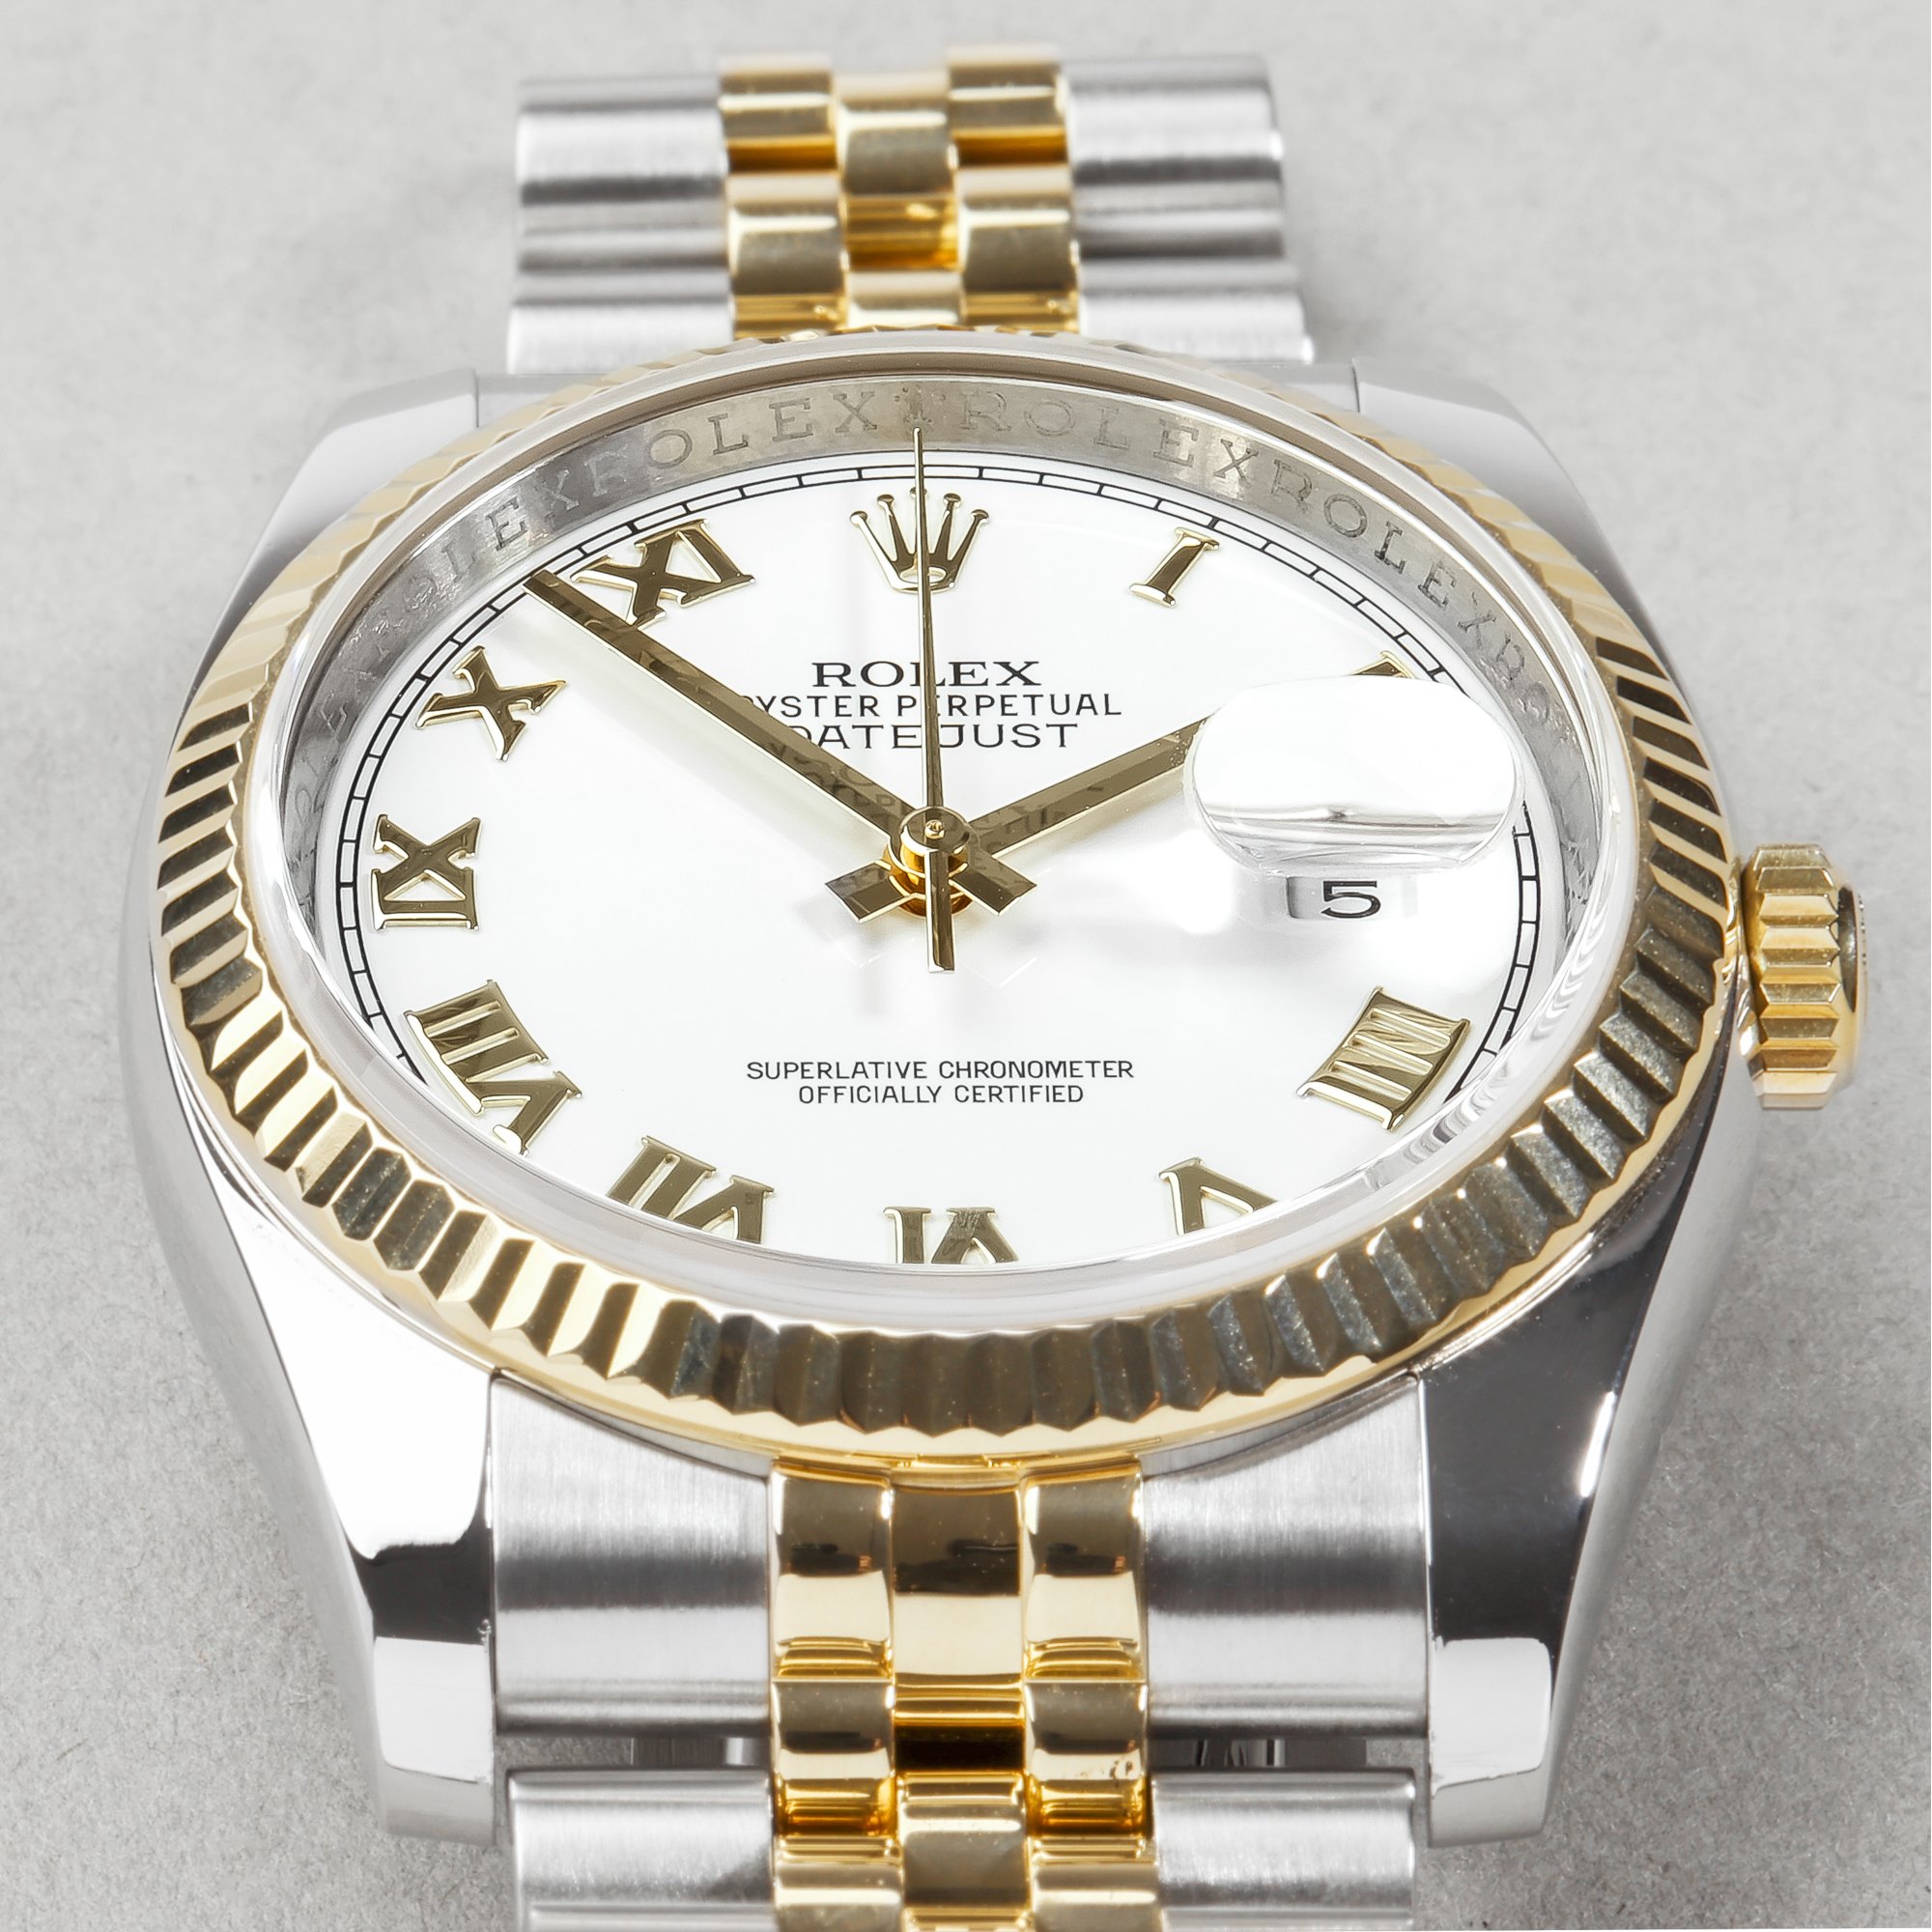 Rolex Datejust Yellow Gold & Stainless Steel 116233